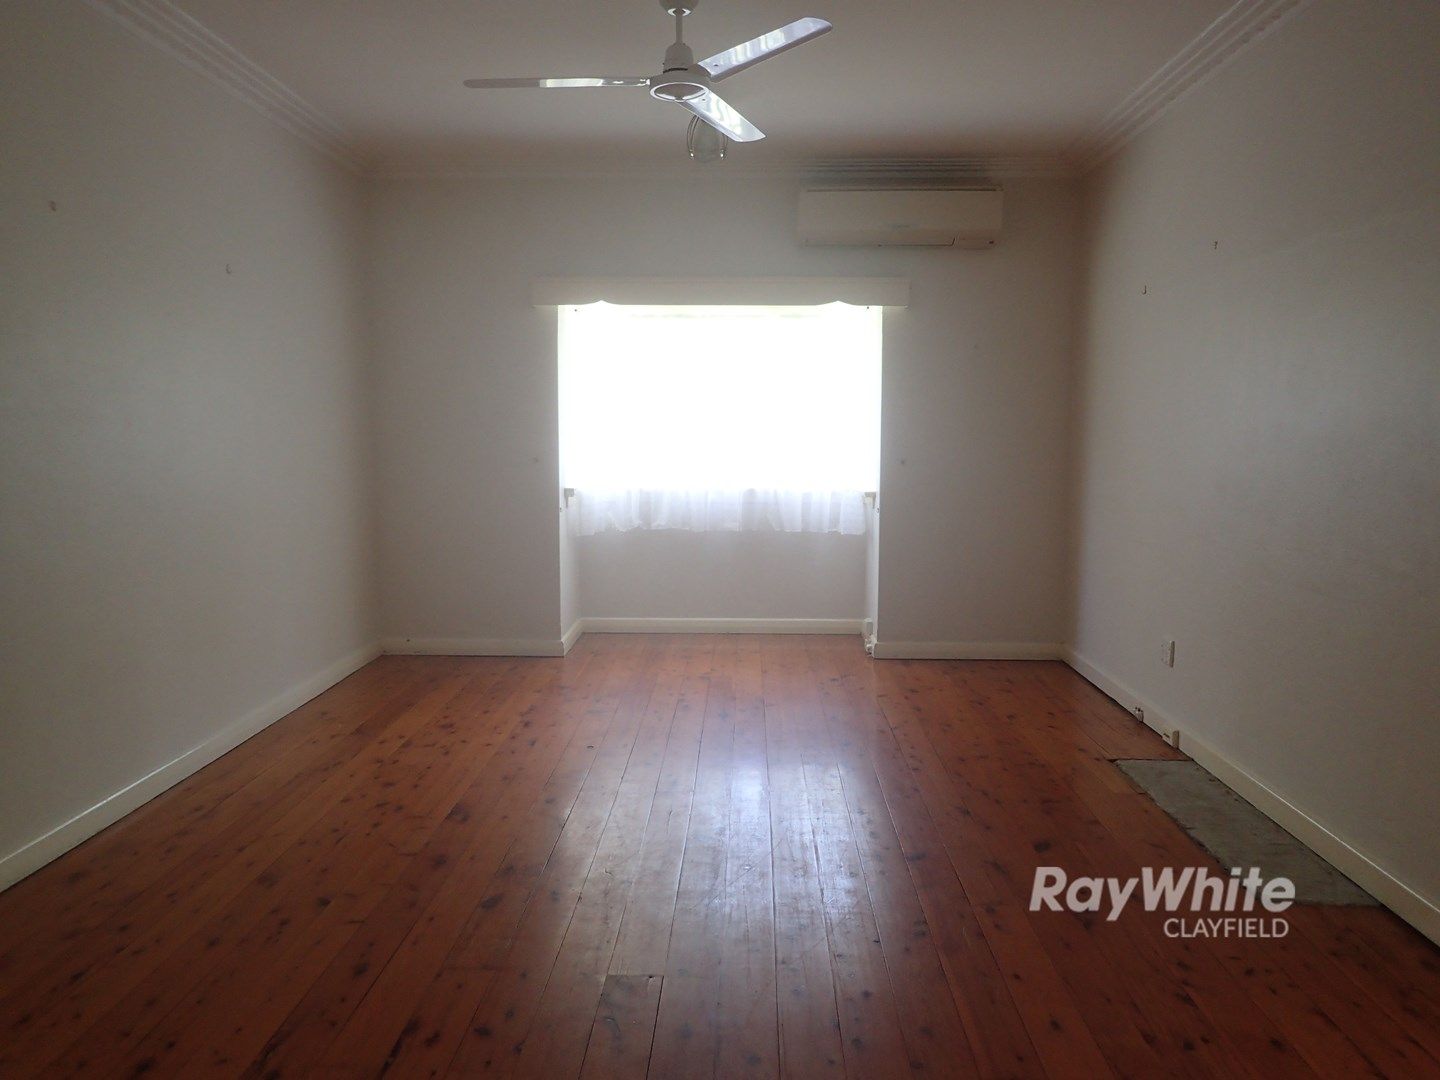 370 Rode Road, Chermside QLD 4032, Image 1